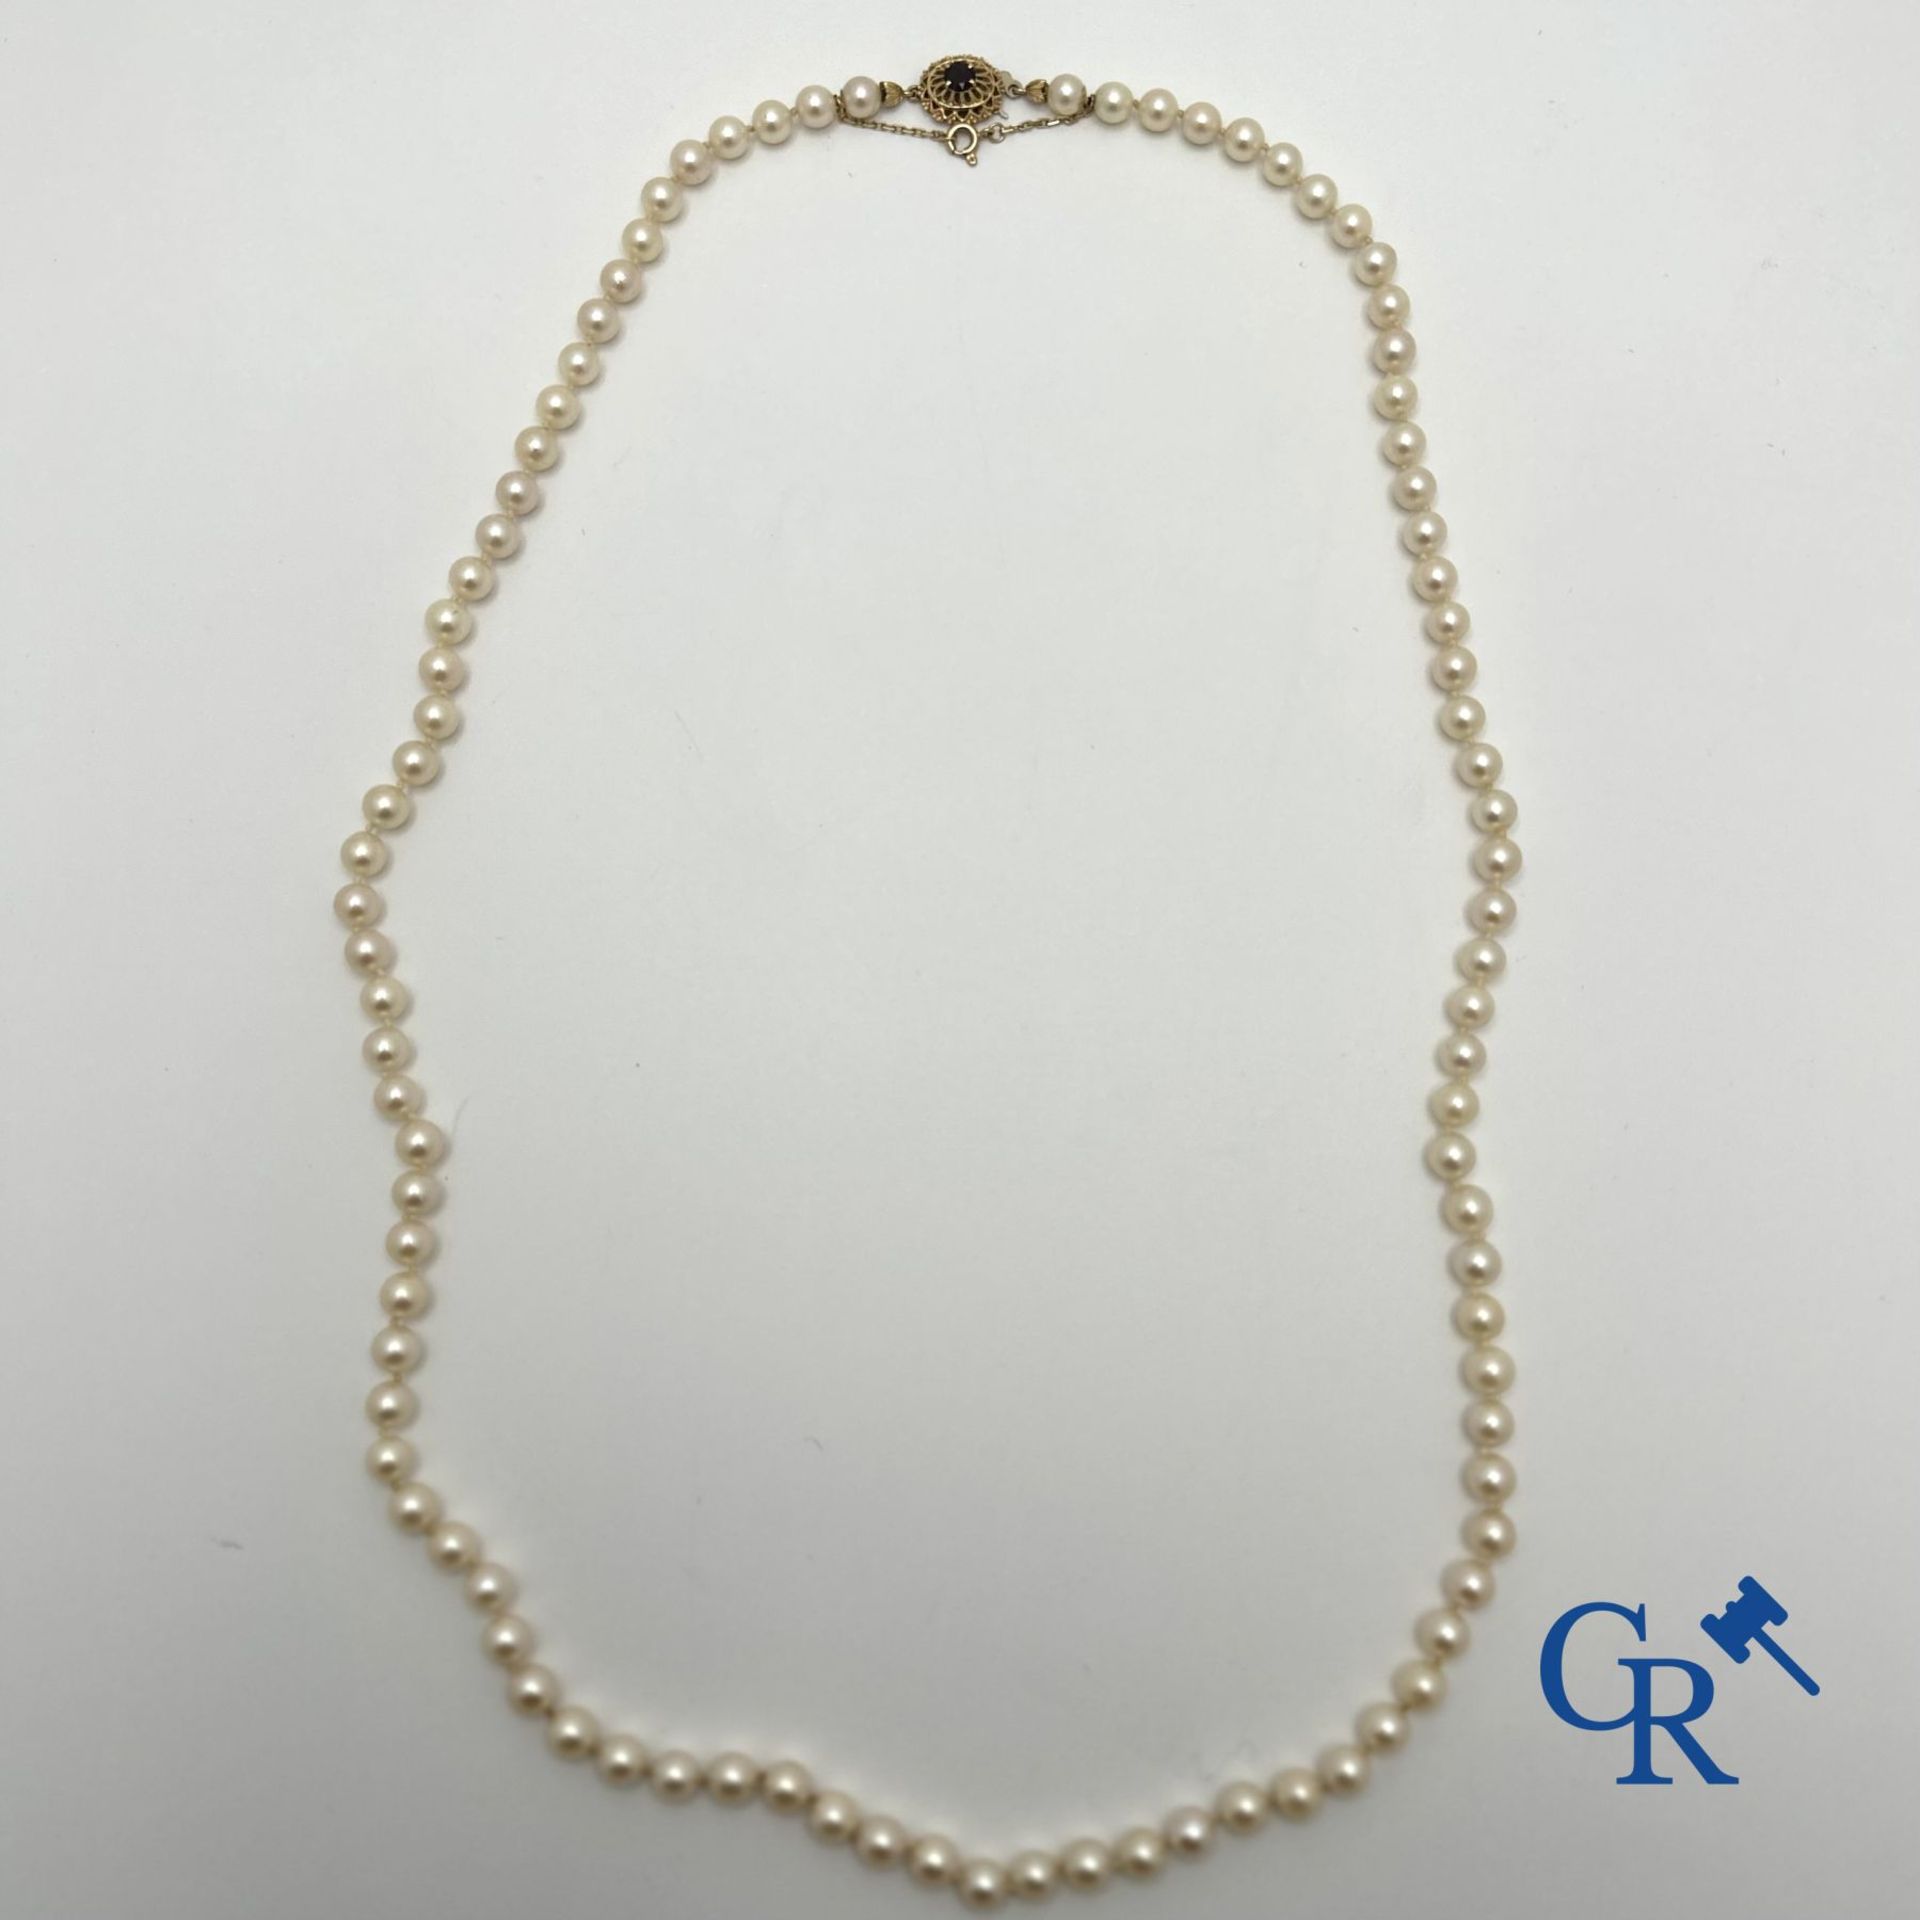 Jewellery: Lot consisting of a pearl necklace with gold clasp 18K and a pair of earrings in gold 18K - Image 5 of 6